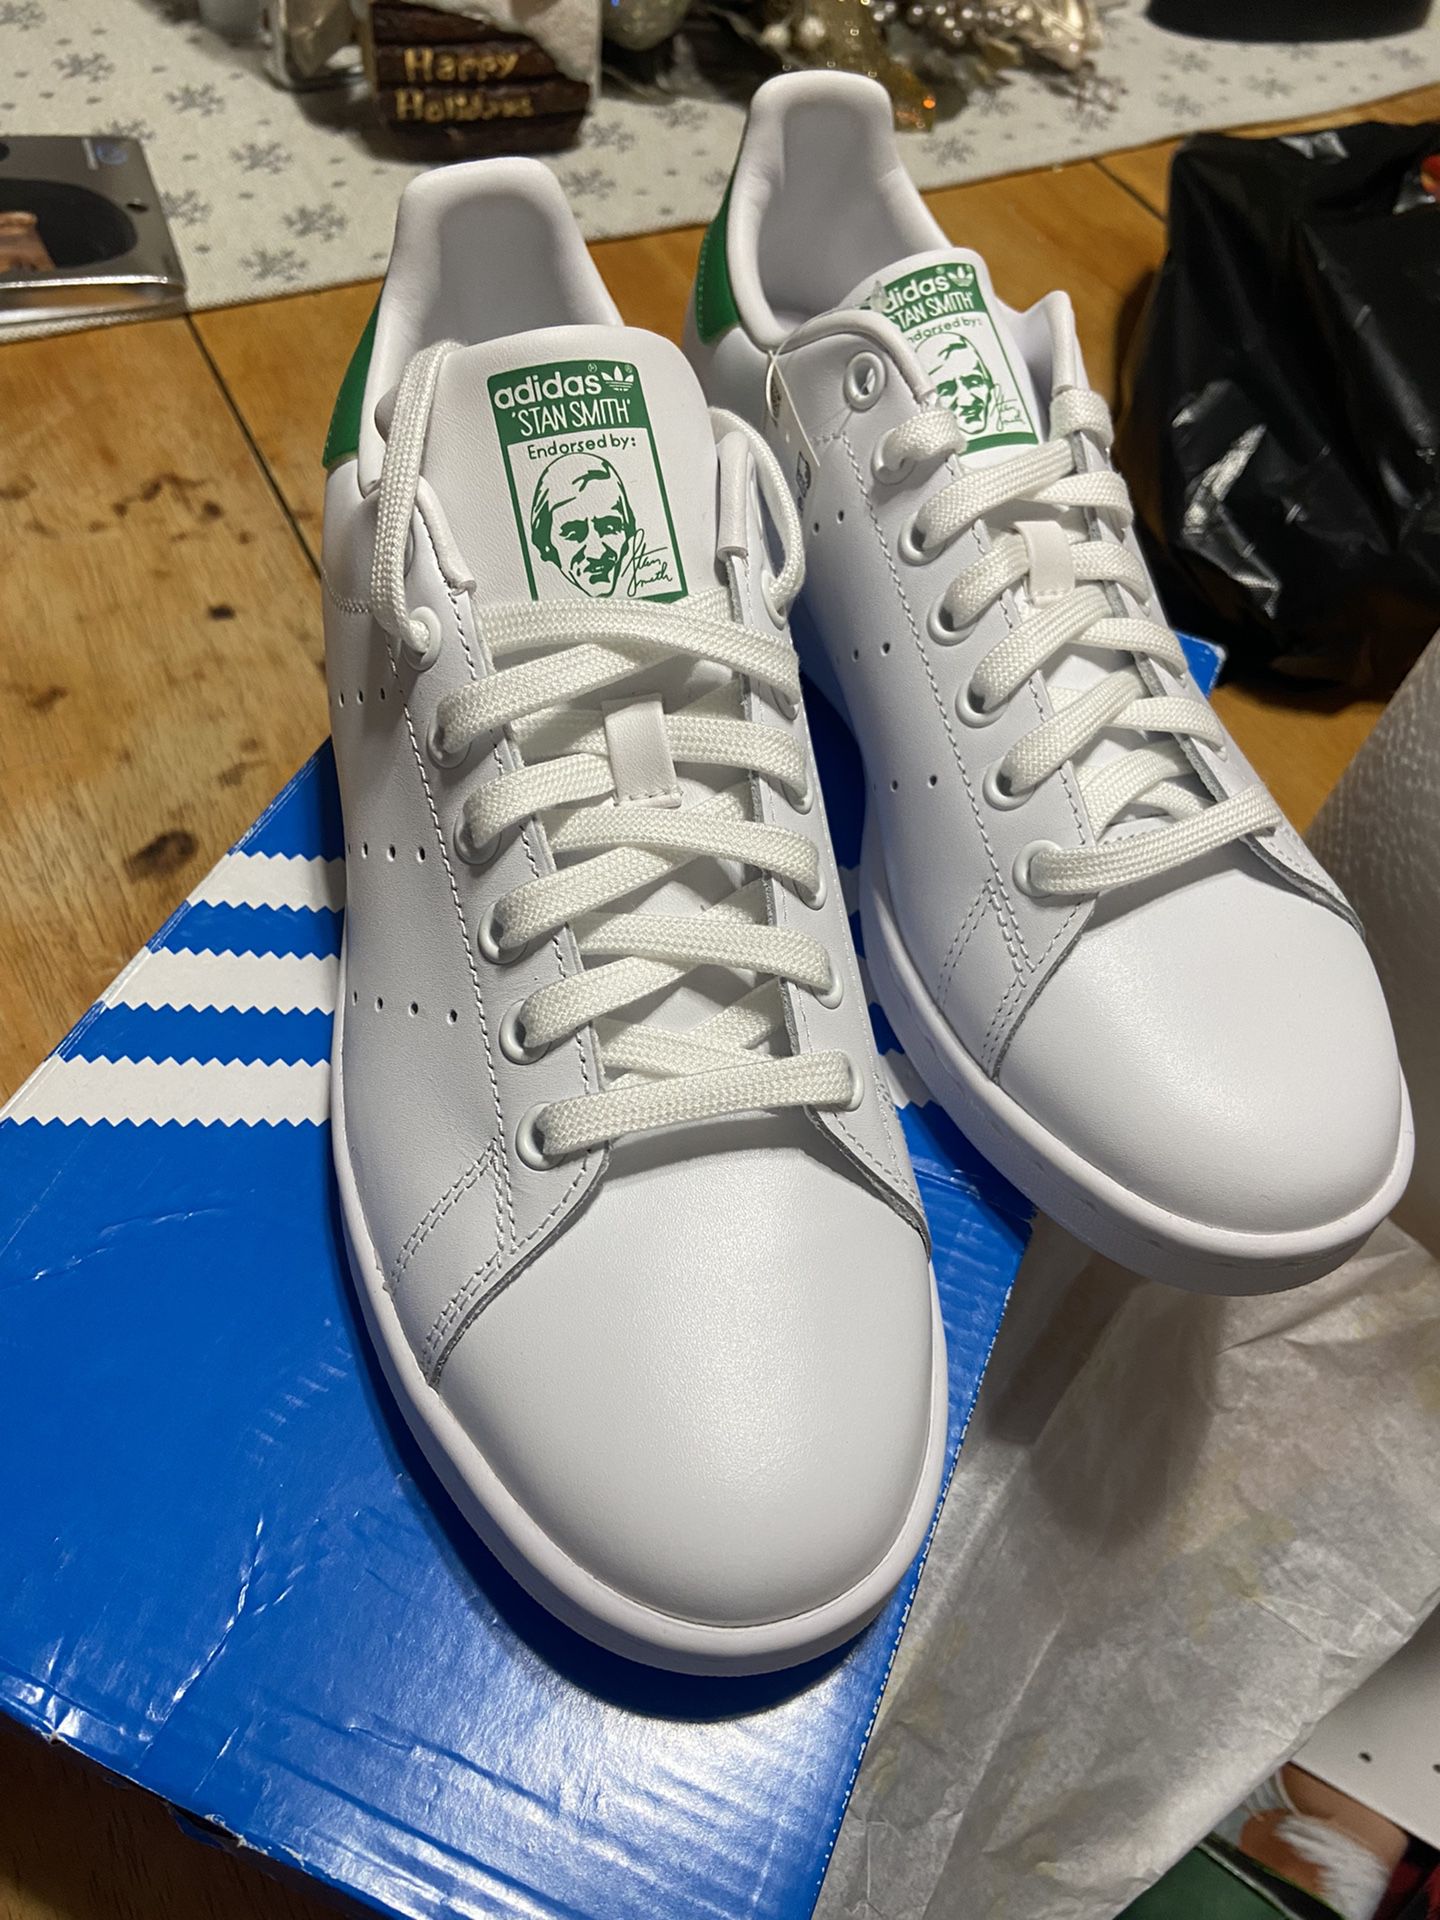 lever hans Hindre Stan Smith Adidas Women Size 9 for Sale in The Bronx, NY - OfferUp